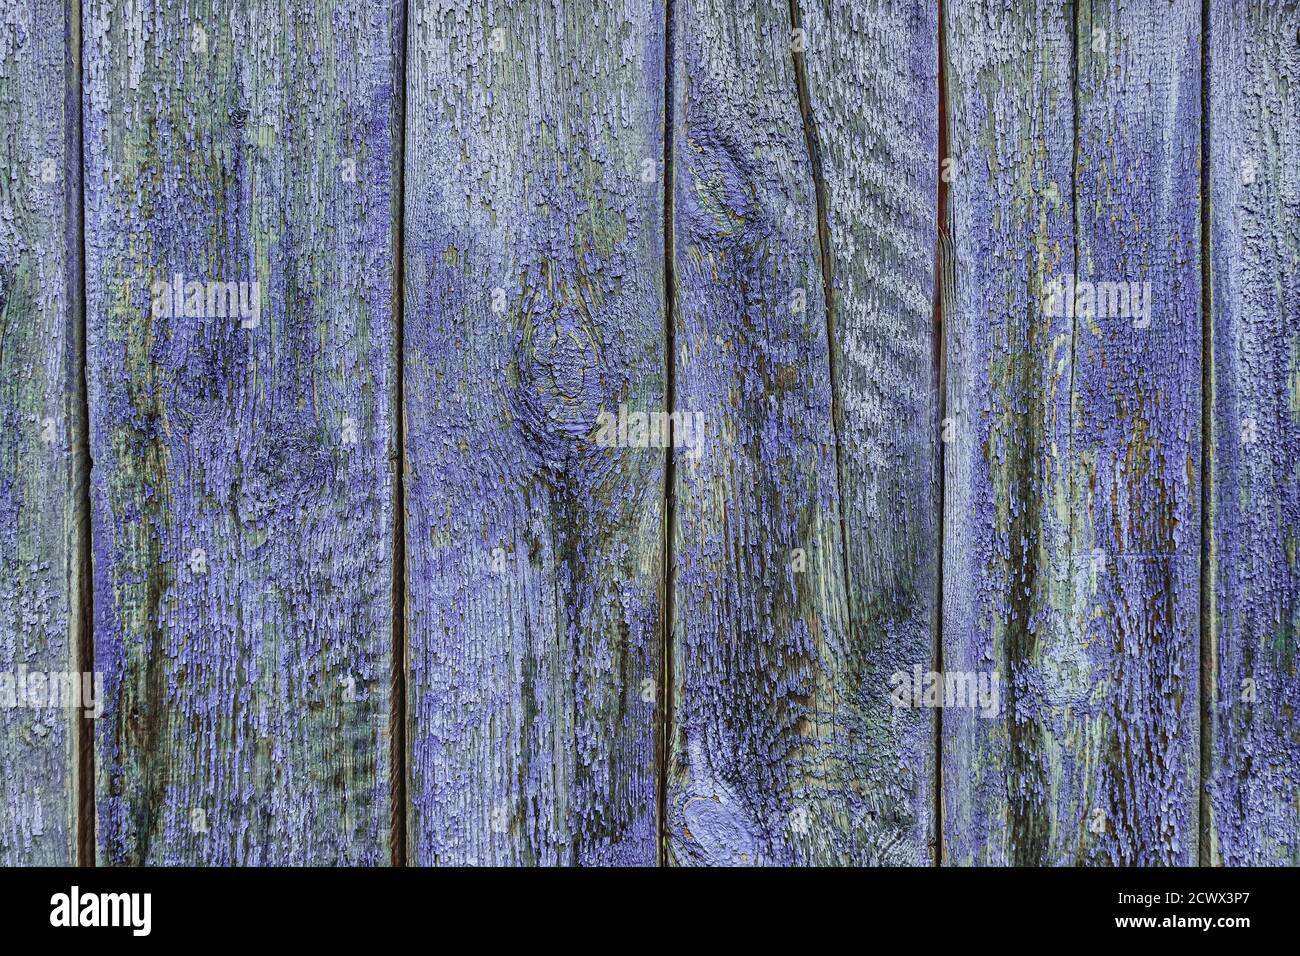 old lilac or purple wooden fence wood texture abstract Stock Photo